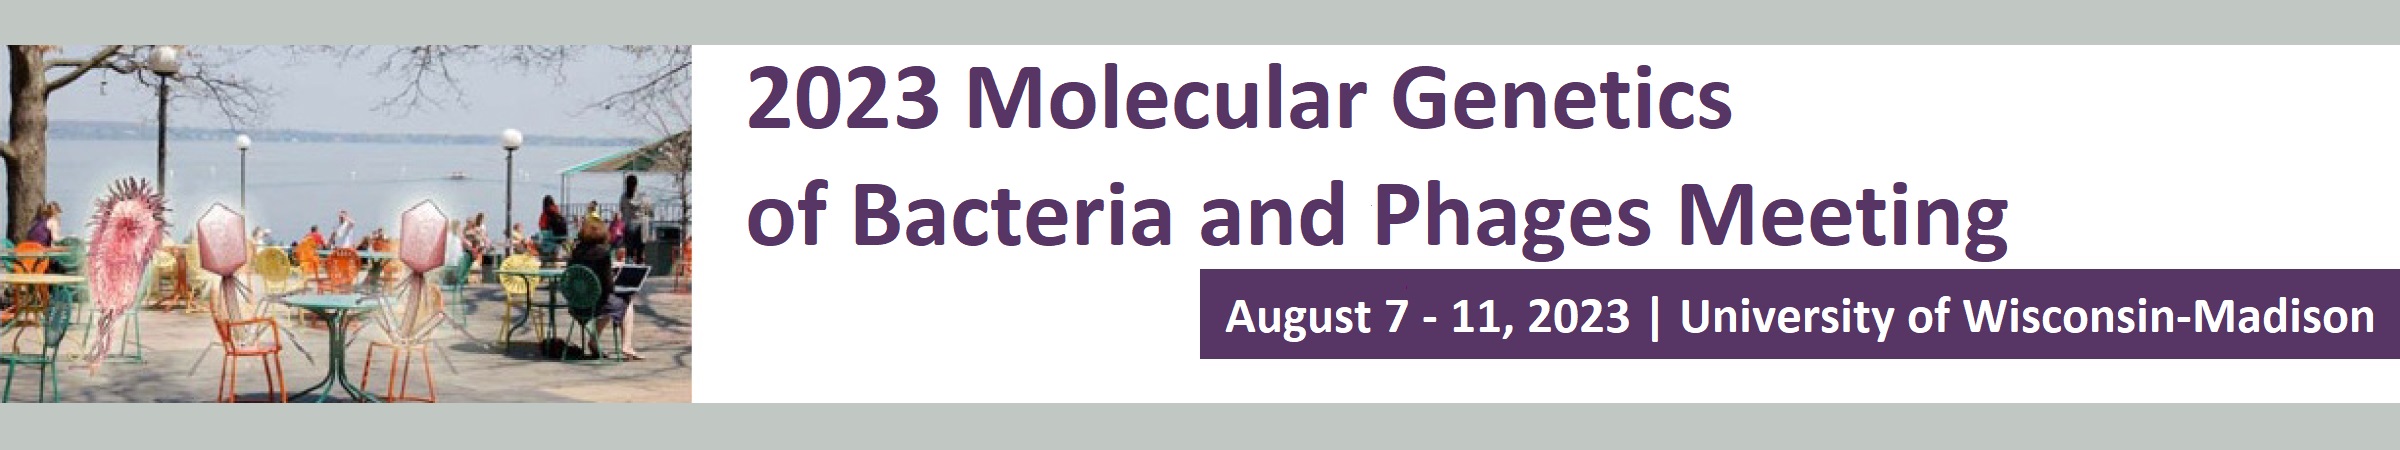 Molecular Genetics of Bacteria and Phages Meeting